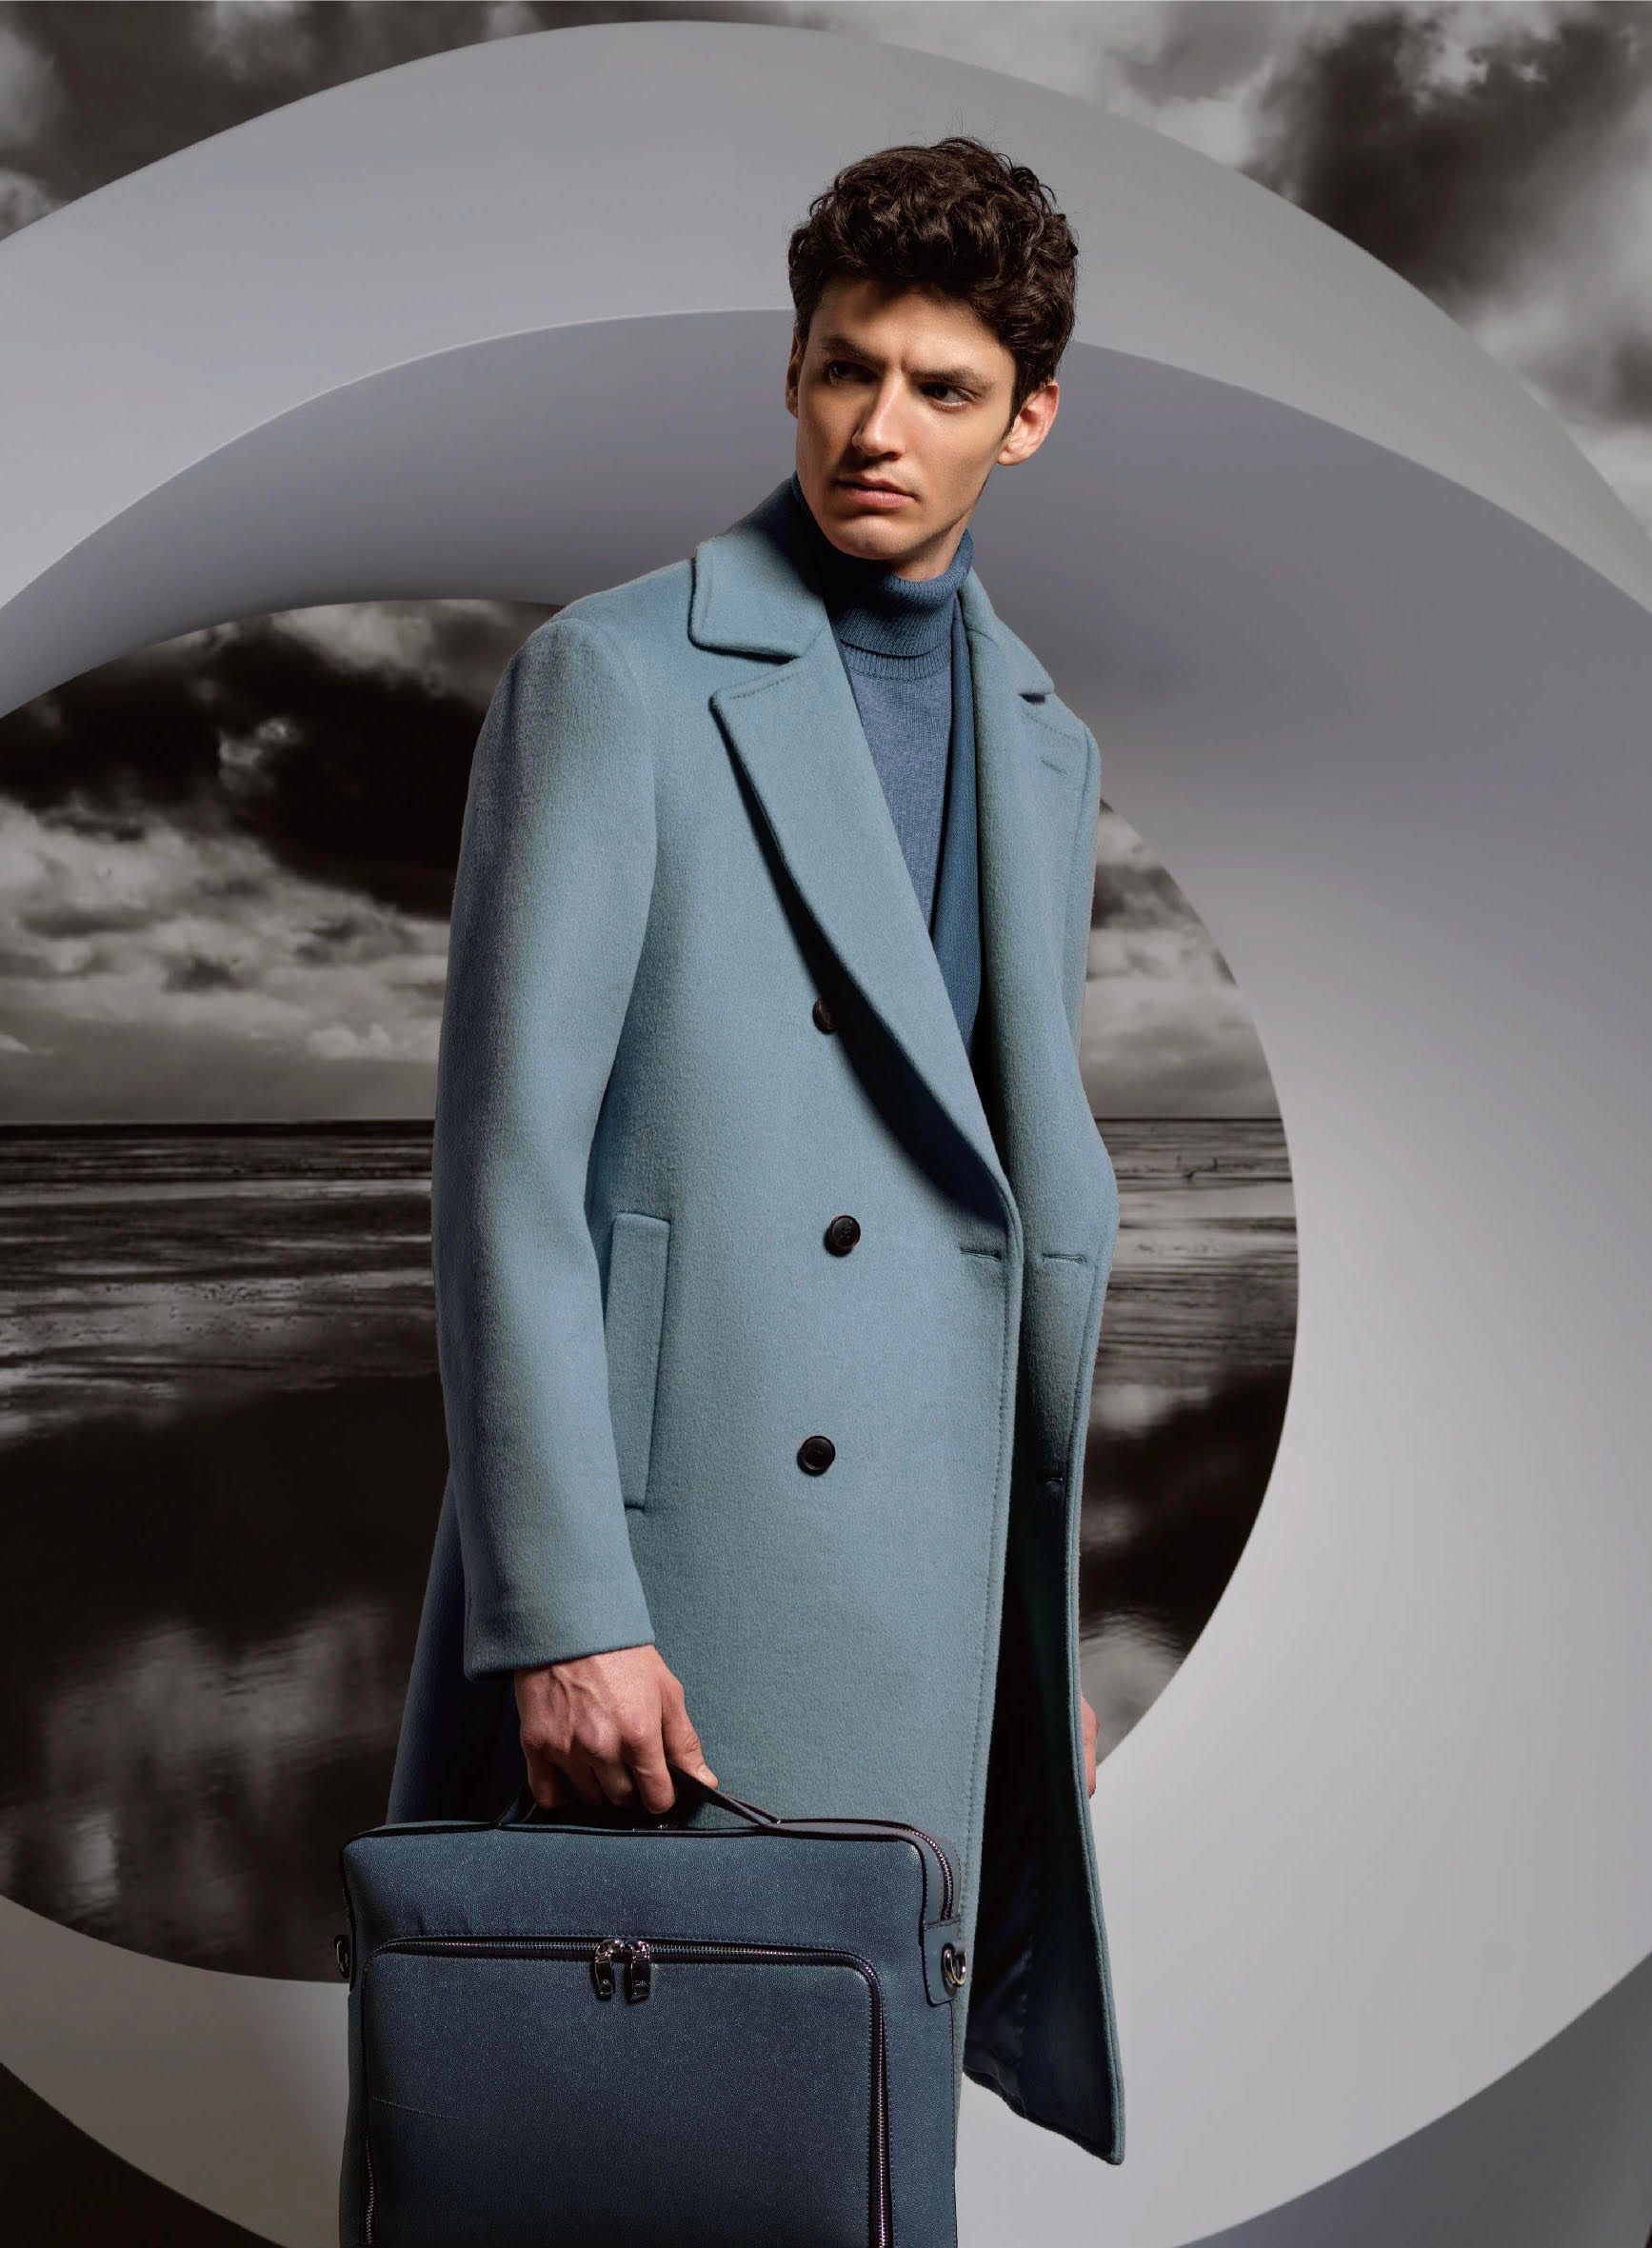 A man in a blue coat is holding a briefcase.